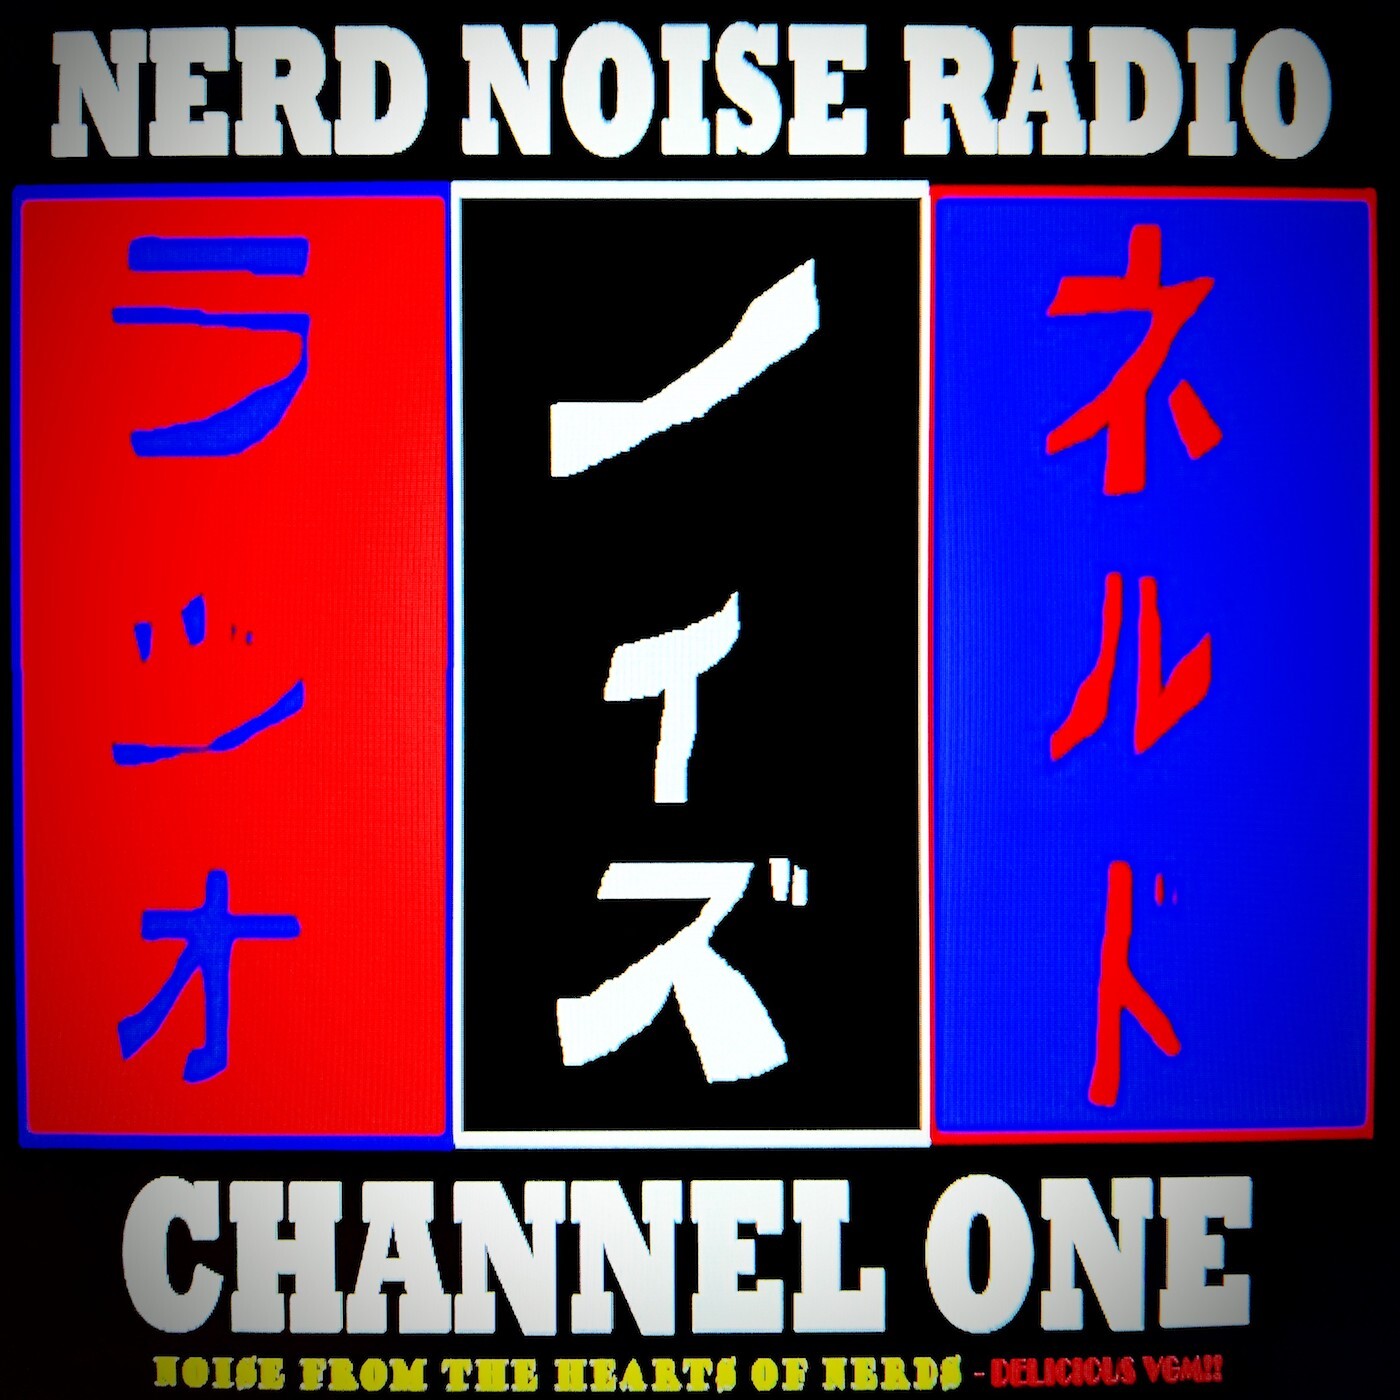 Nerd Noise Radio - Channel 1: ”Noise from the Hearts of Nerds” Podcast - C1E24: ”TwoFer Tuesday - vol. 3”